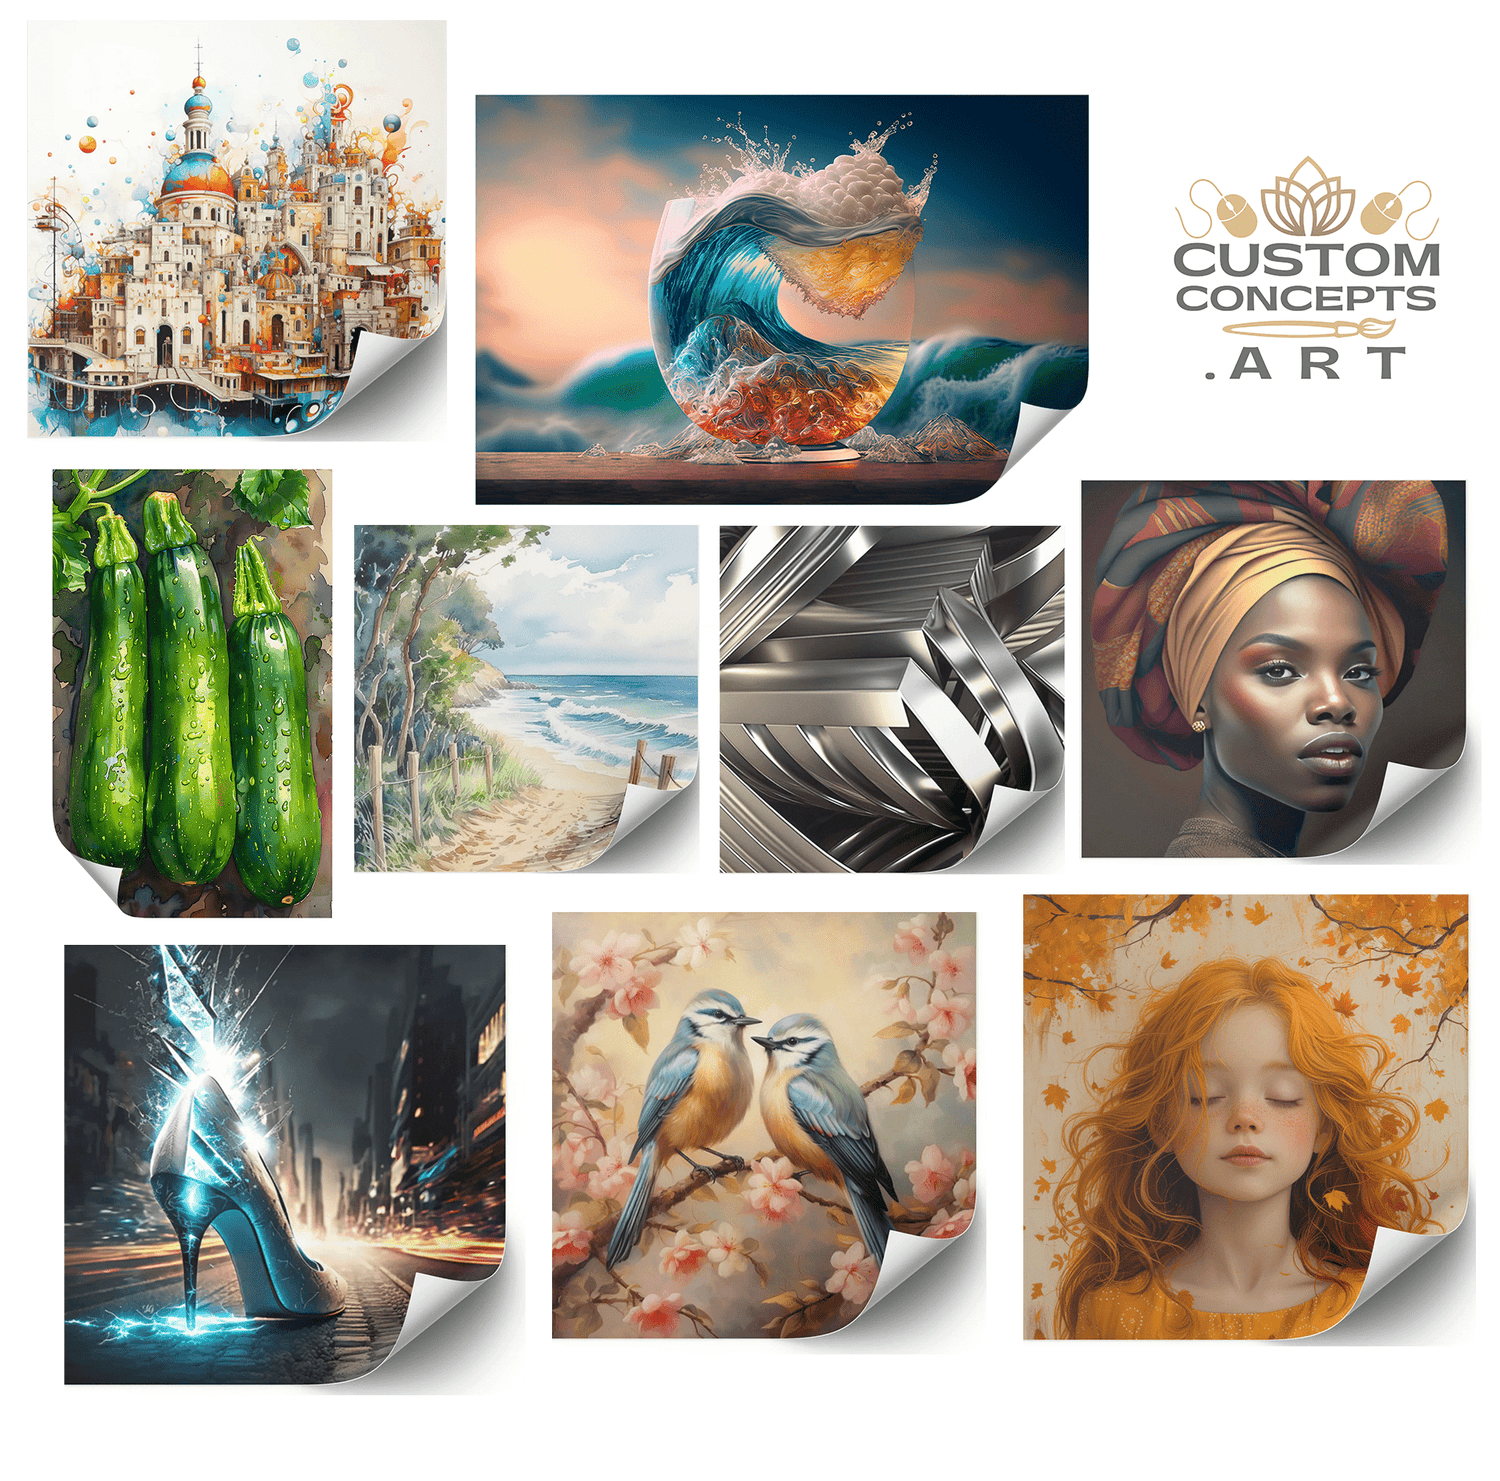 A display of Fine Art Posters in different art styles- abstract italian architecture-surreal ocean waves in a glass-zucchinis on vines-beach path-abstract metallic silver geometric art-beautiful woman in headdress-fantasy blue high heeled shoe struck by lightning-botanical painting blue birds on cherry blossom branches-fantasy illustration little girl with red hair carrot top autumn fall leaves surround her. All poster wall art available and for sale and customconcepts.art